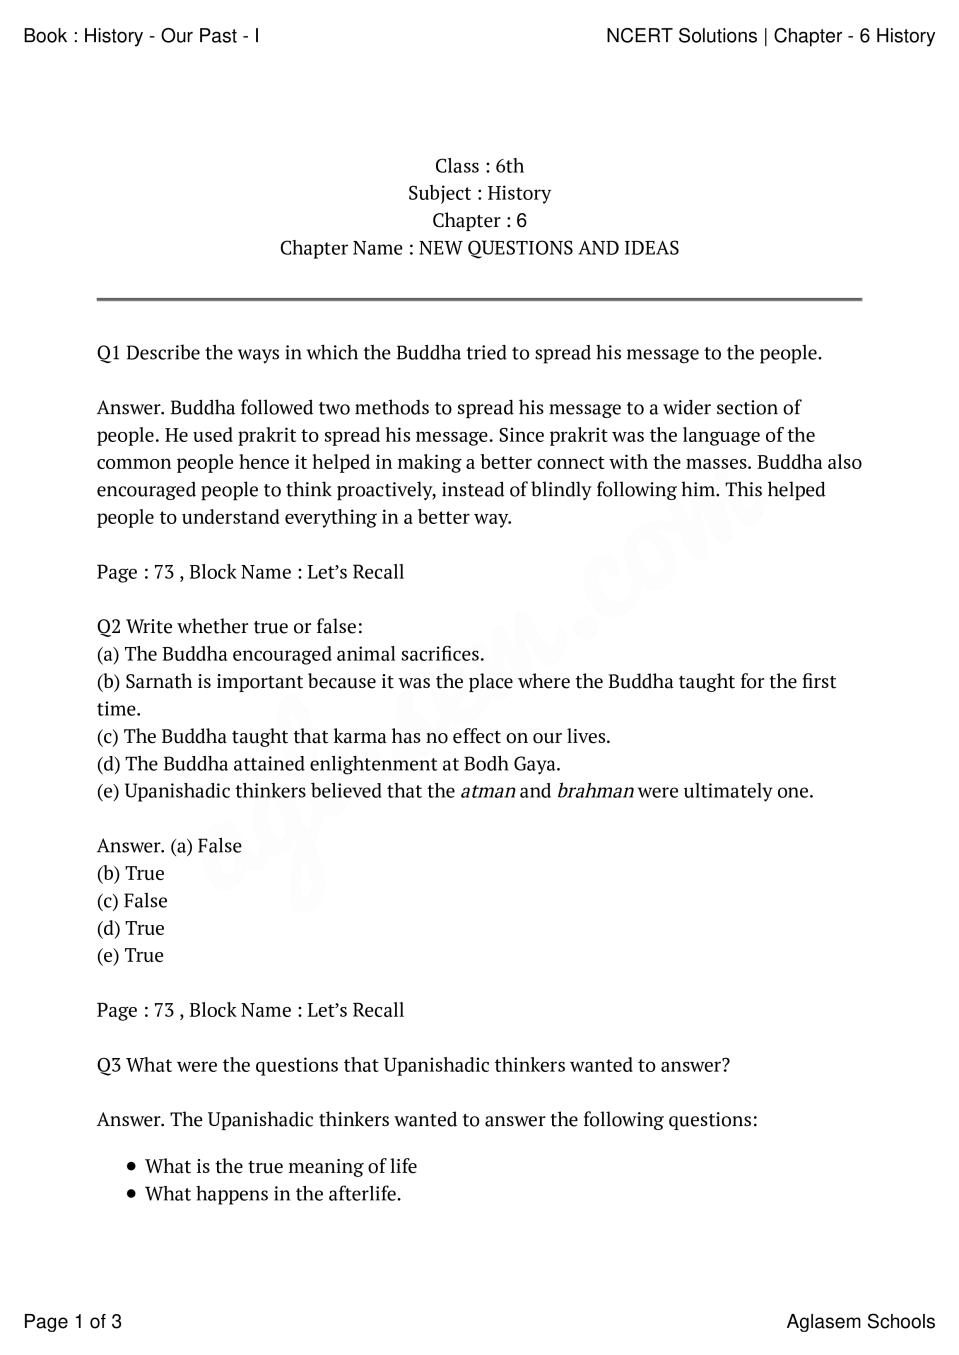 NCERT Solutions for Class 6 History ( Our Past ) Chapter 6 New Questions  And Ideas